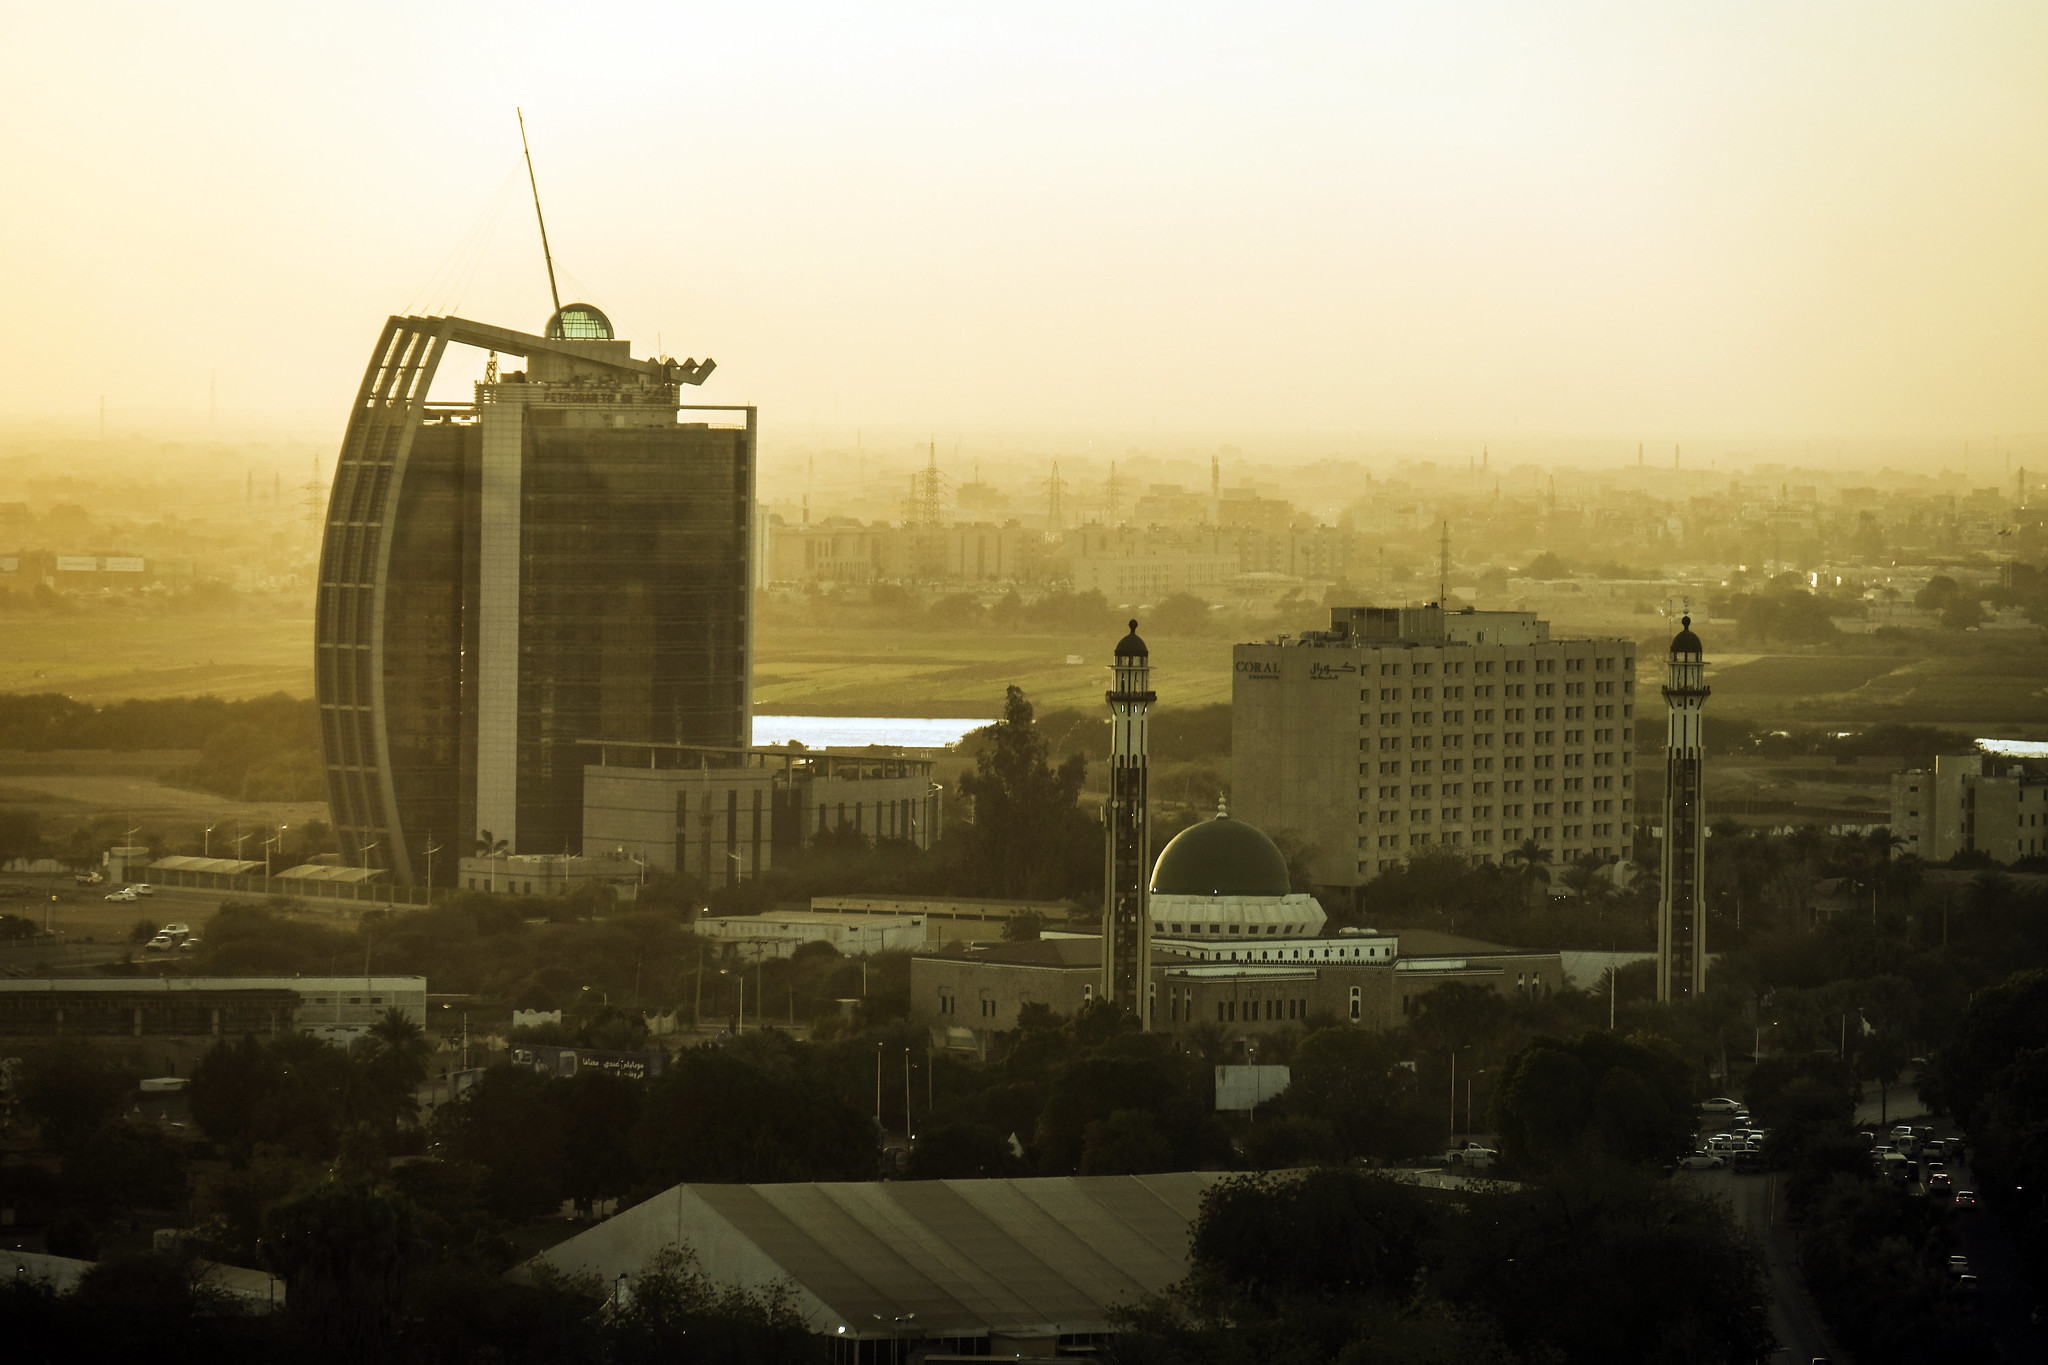 Sudan Moves in Right Direction on Religious Liberty, but Progress is Fragile